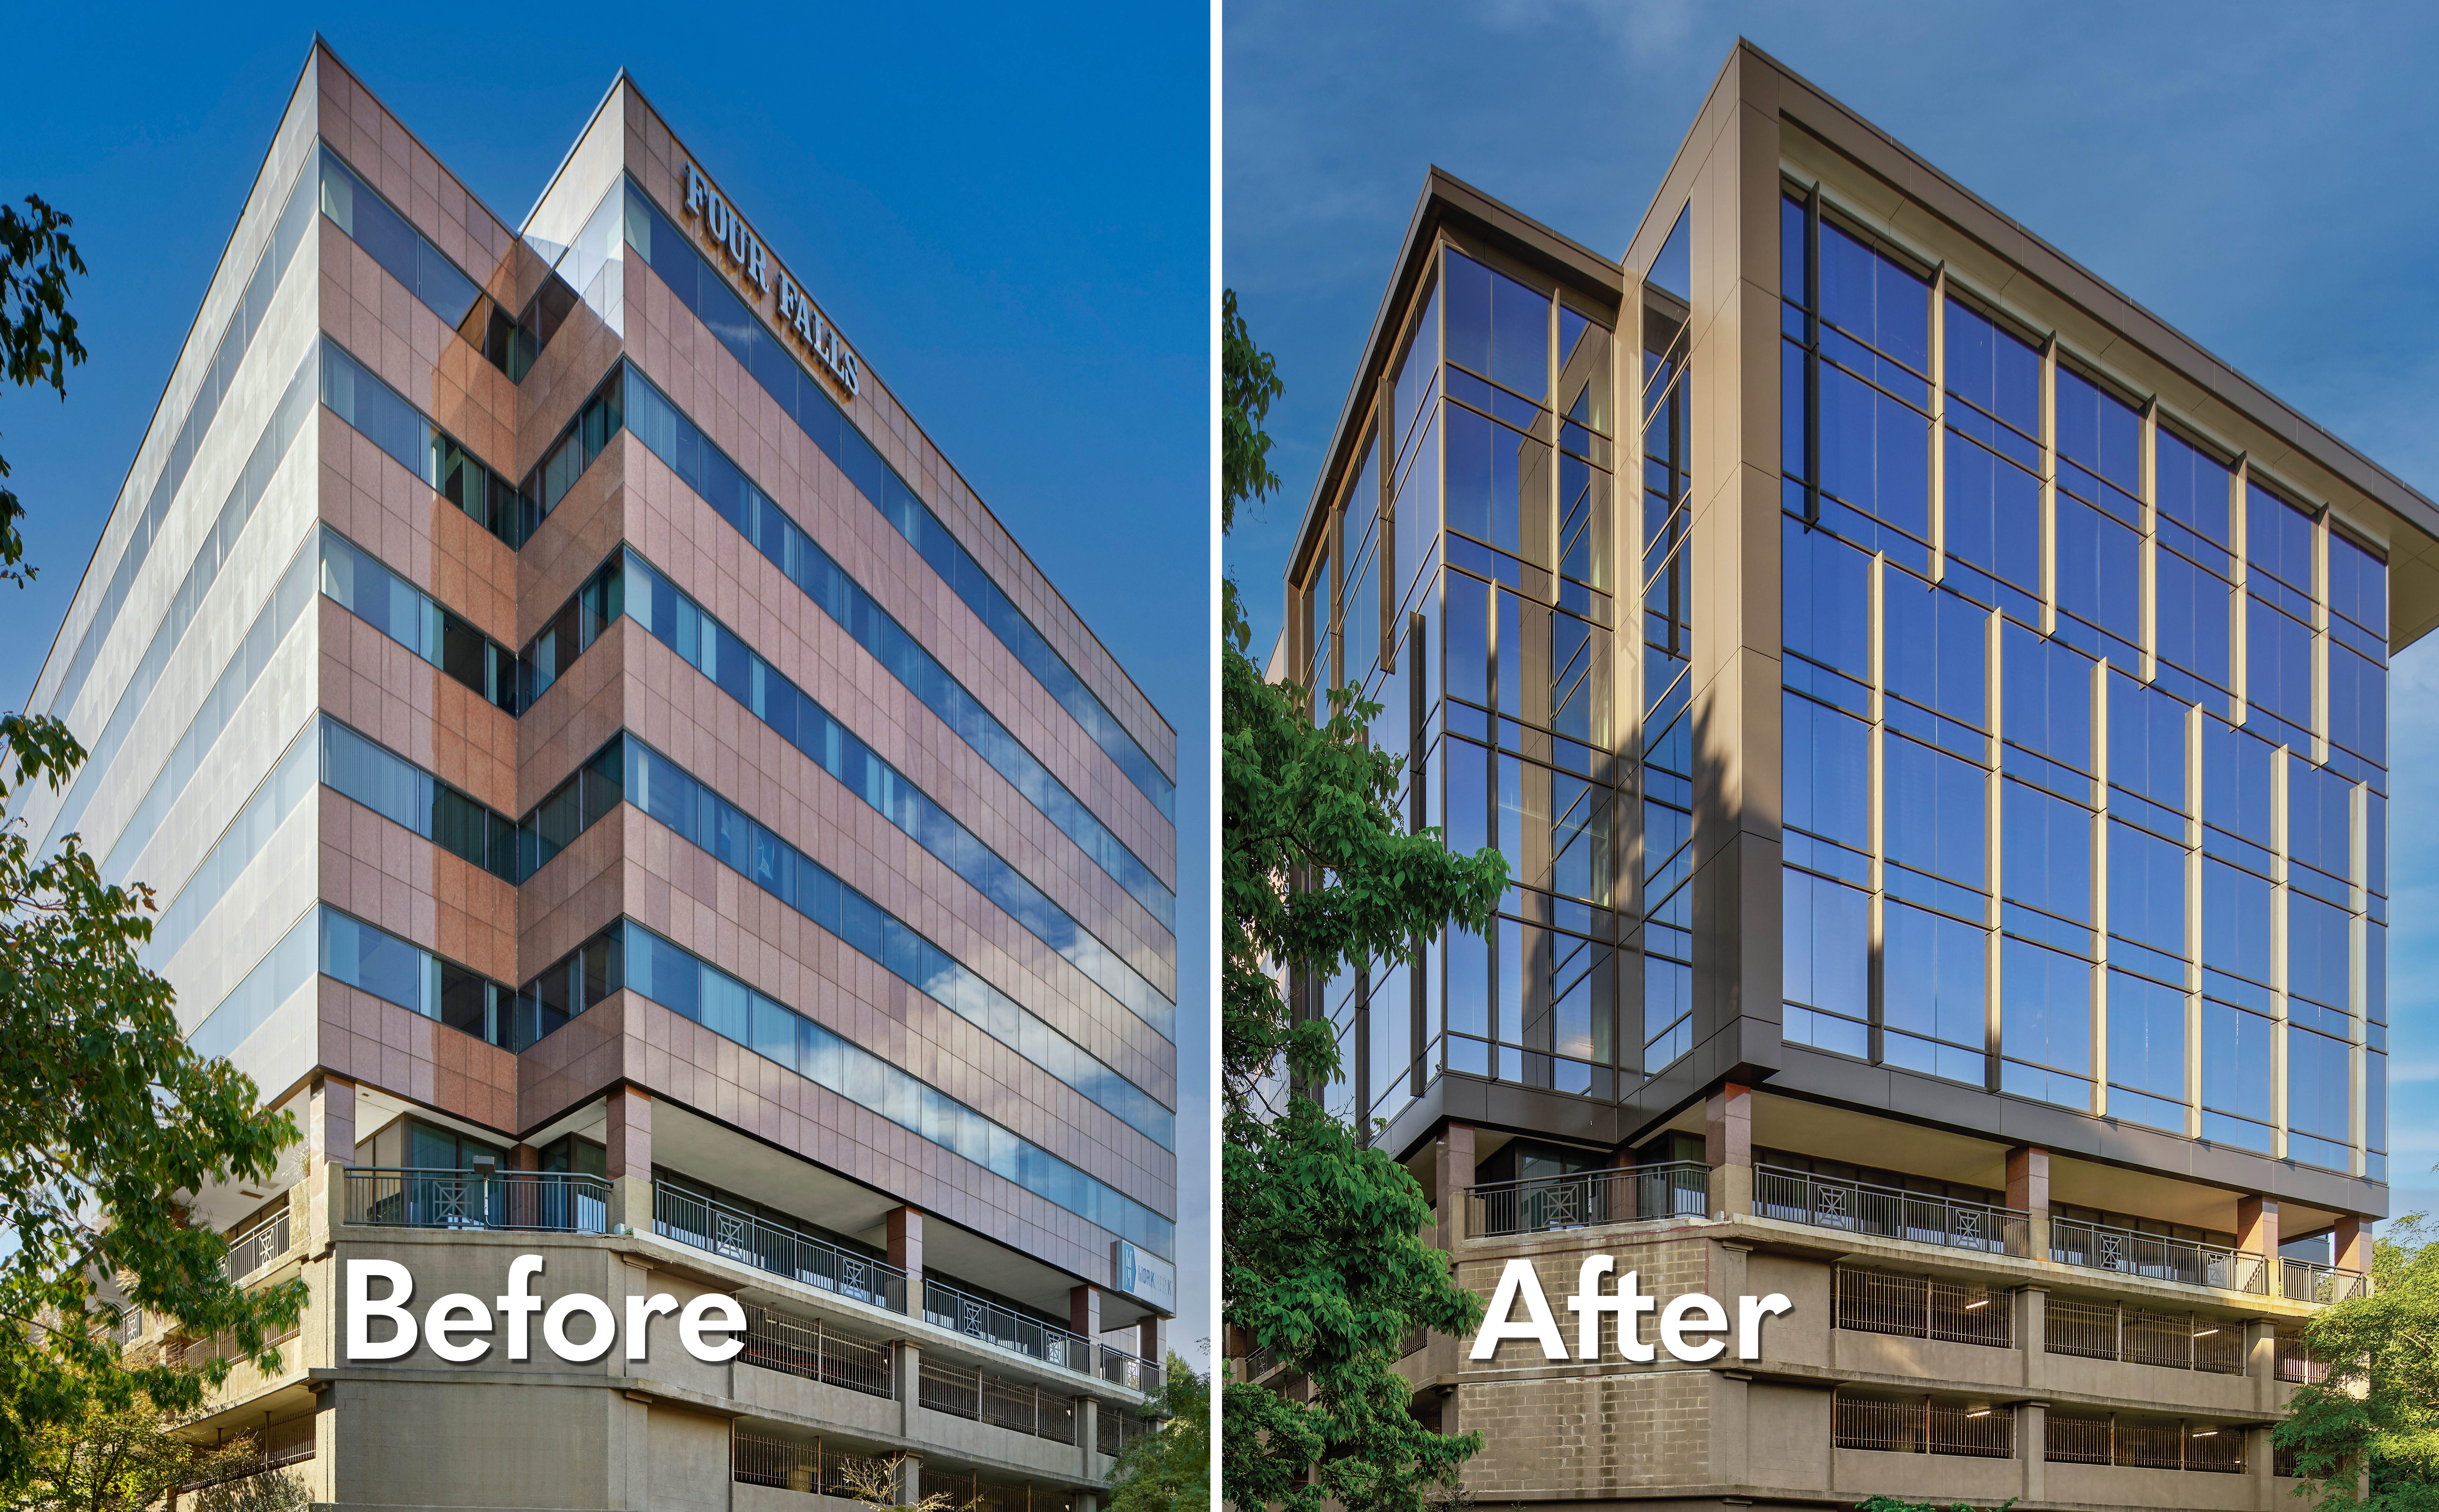 Smart windows replaced tradition low-e glass and blinds in the renovation of the 1K1 Office in Conshohocken, PA. 